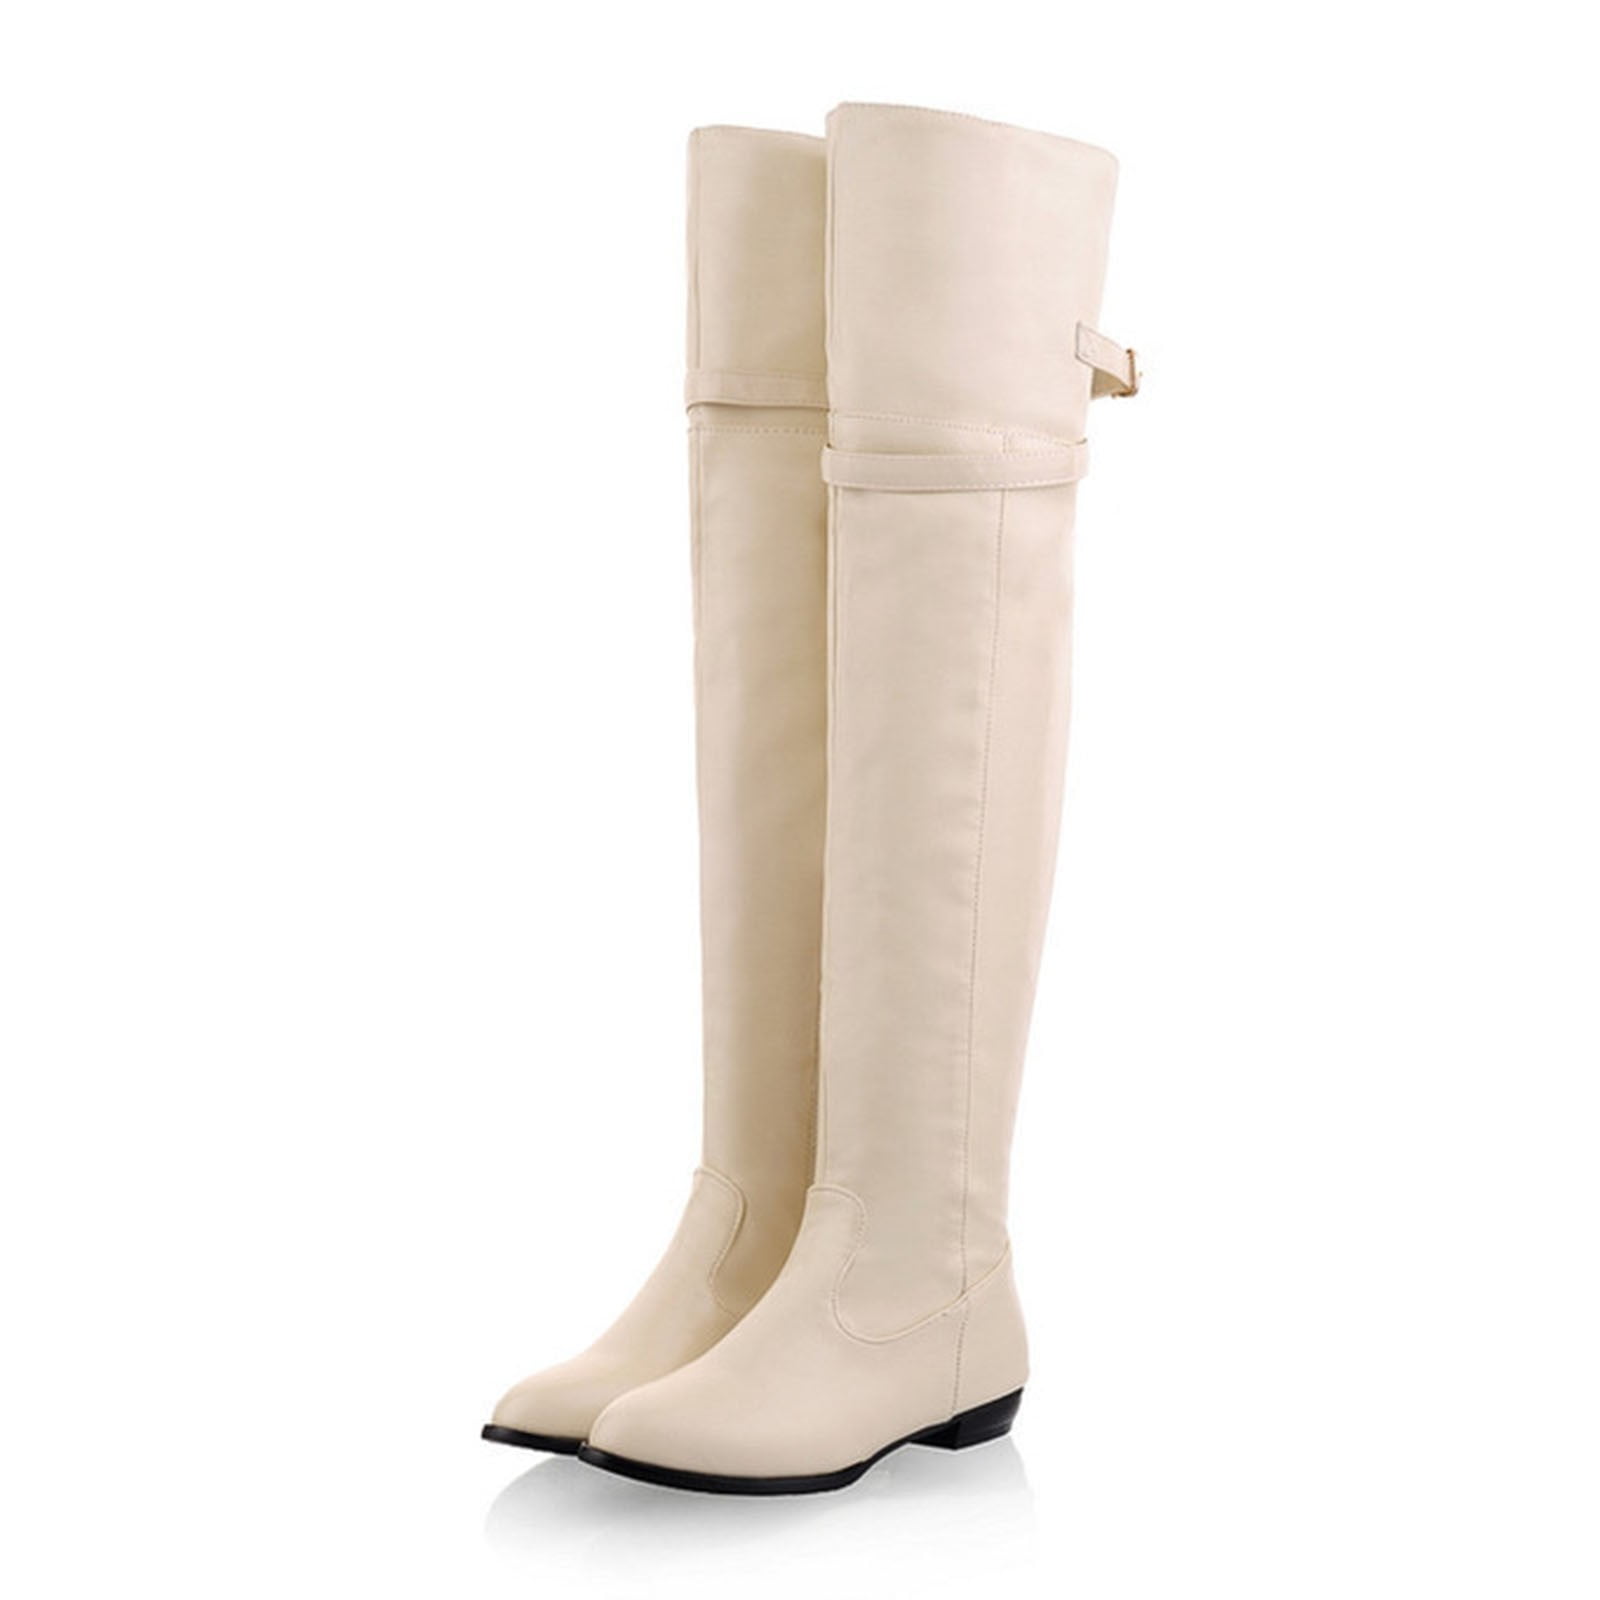 AXXD Low-Heeled Over-The-Knee Boots,White Boots Ankle-High Womens Fall ...